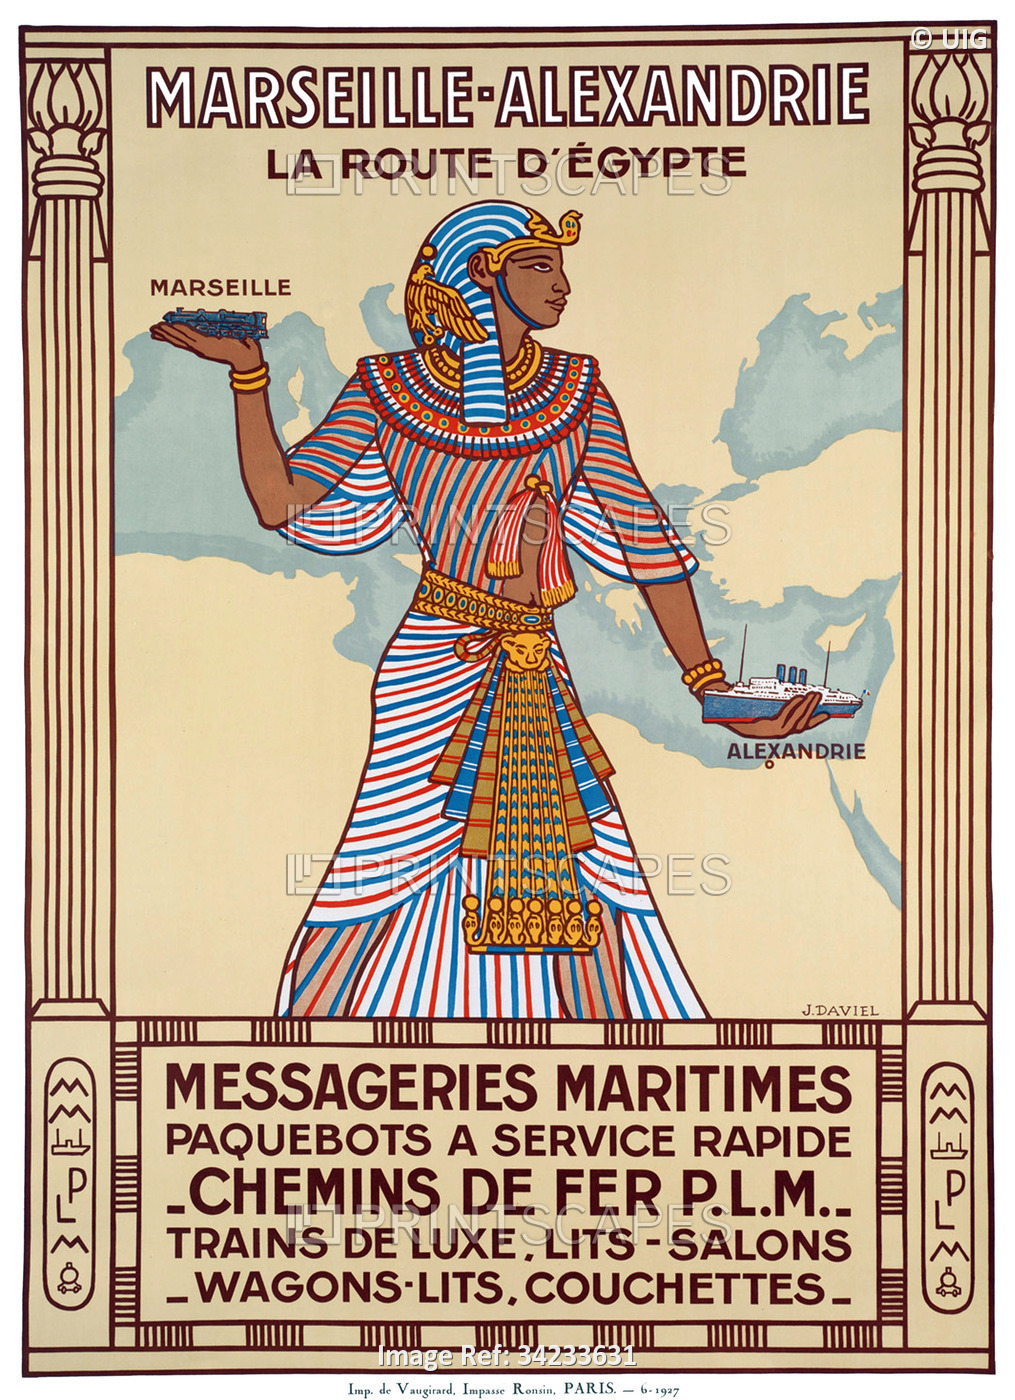 France / Egypt: Advertising poster for 'Marseille-Alexandrie - La Route d'Egypte' (Marseilles to Ale